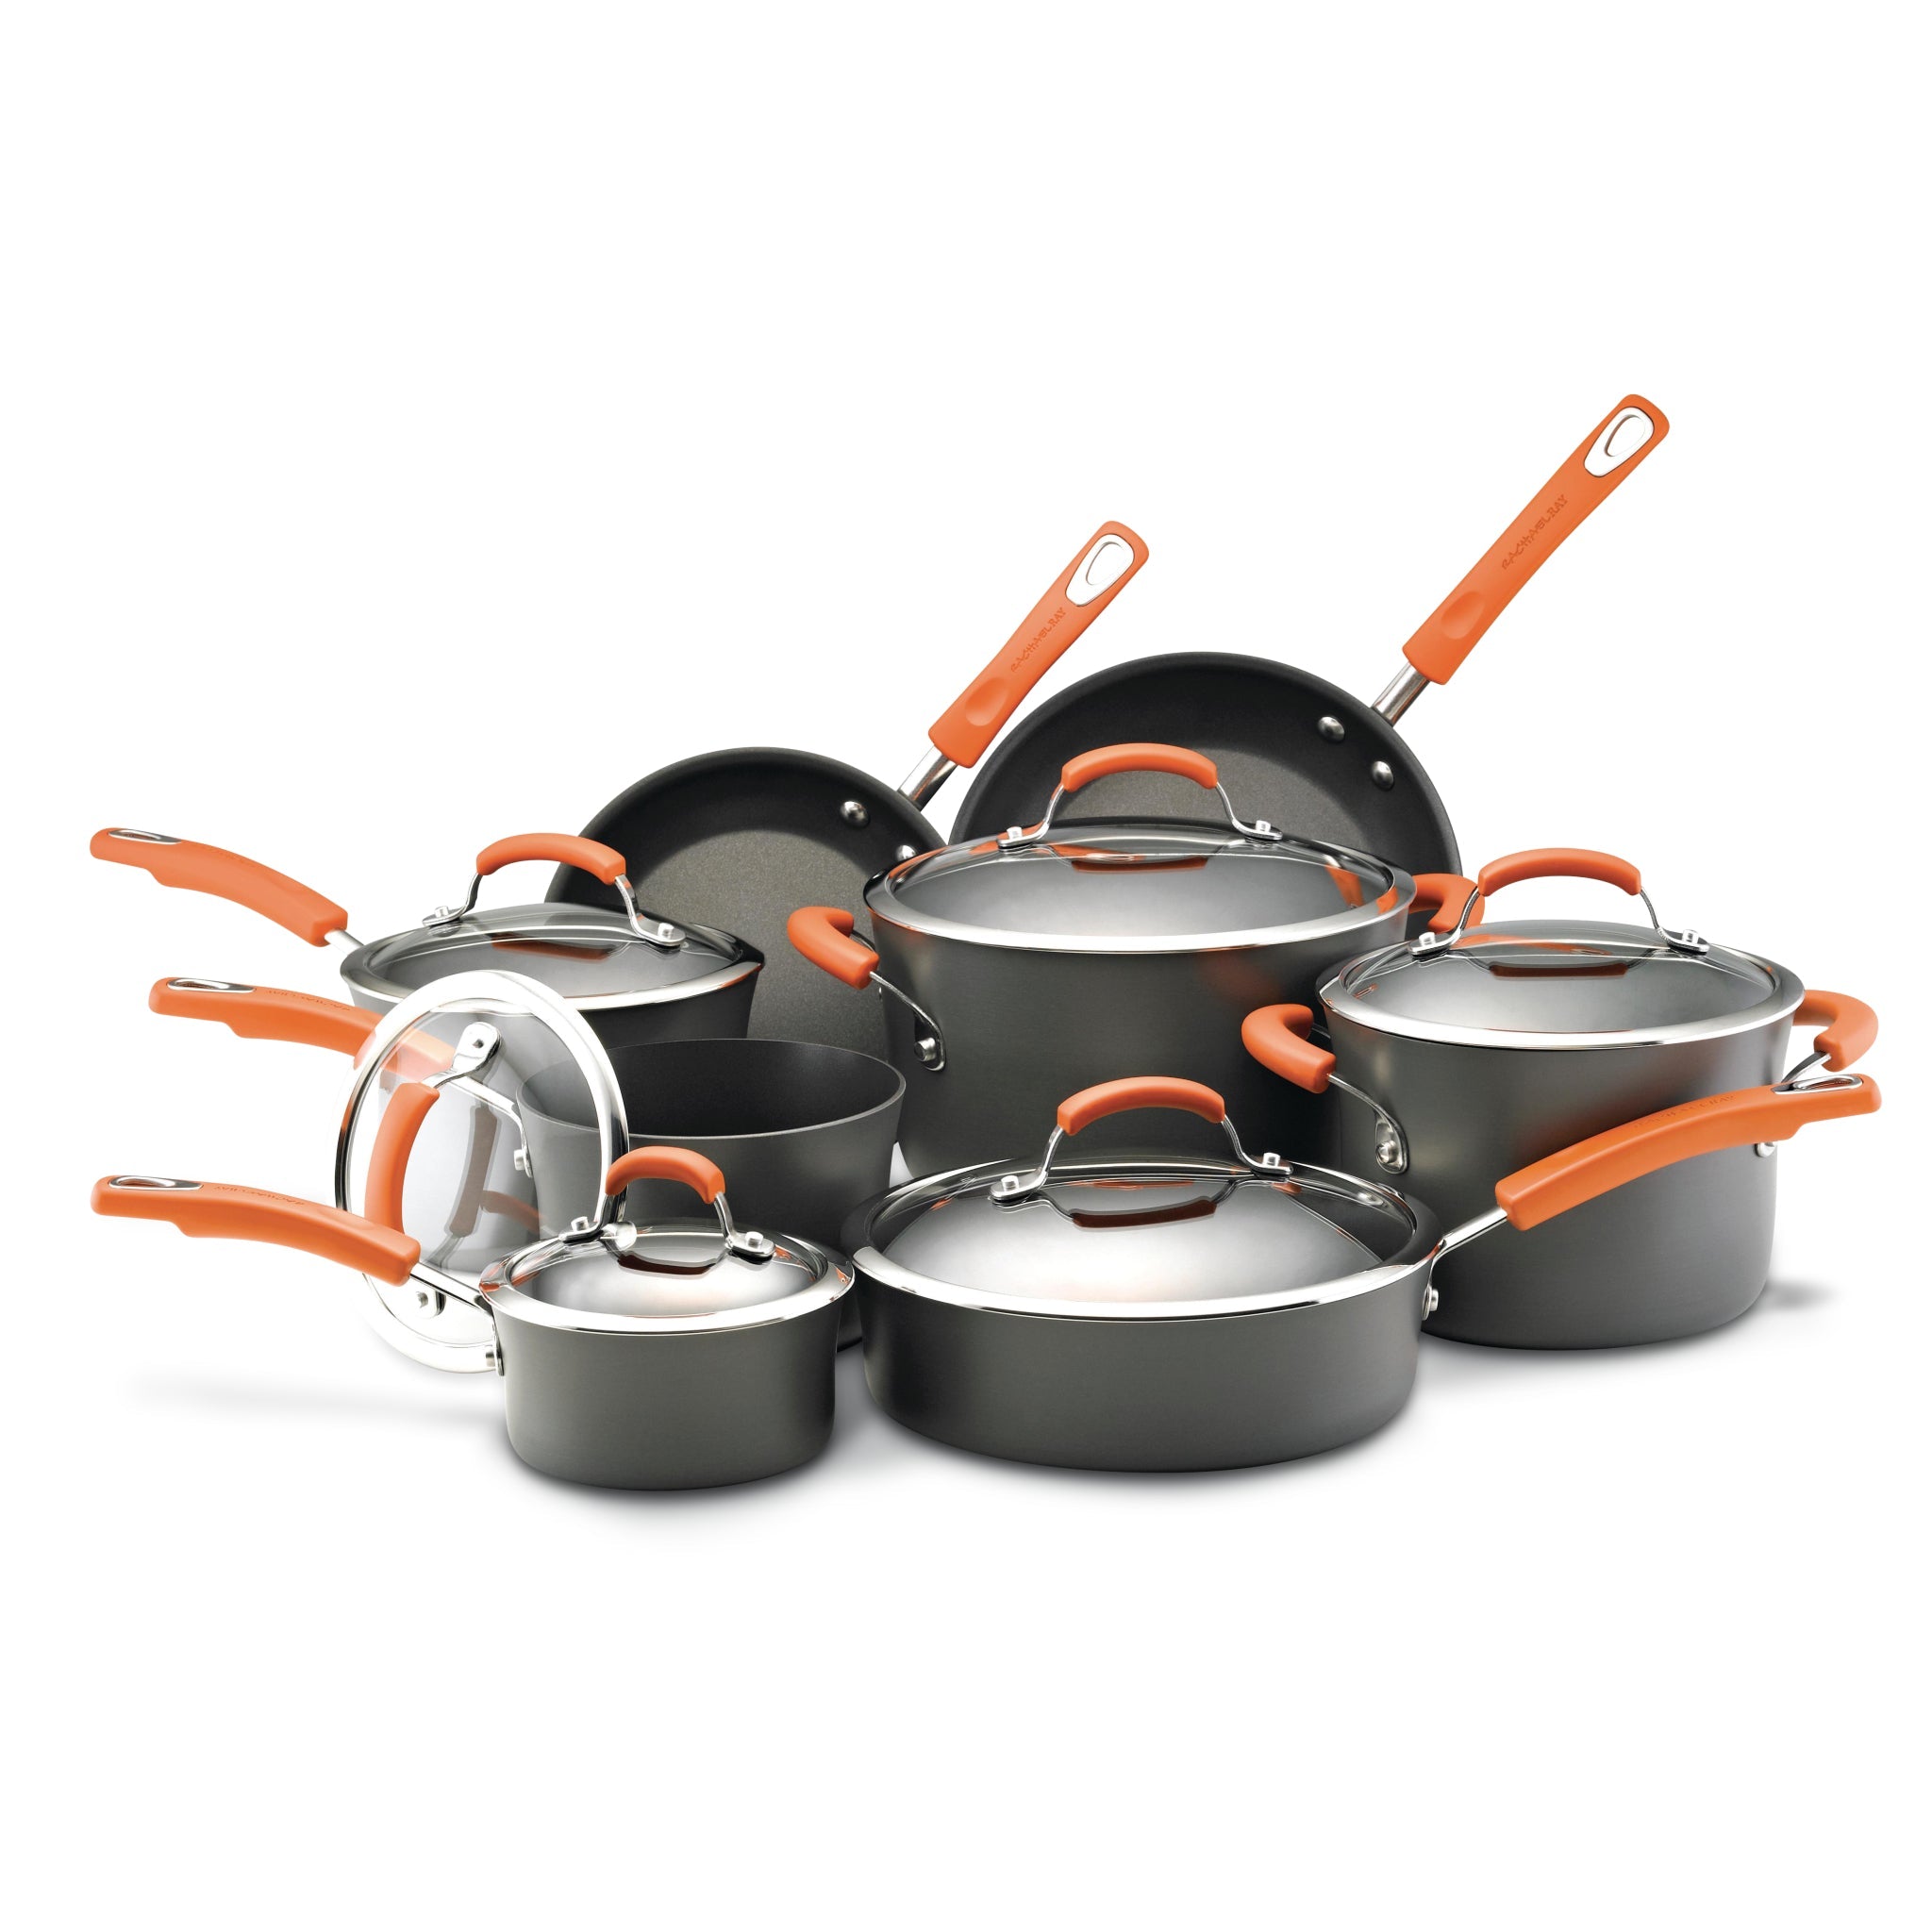 Rachael Ray® Hard-Anodized Oval Sauté Pan Nonstick with Lid, 5-Quart